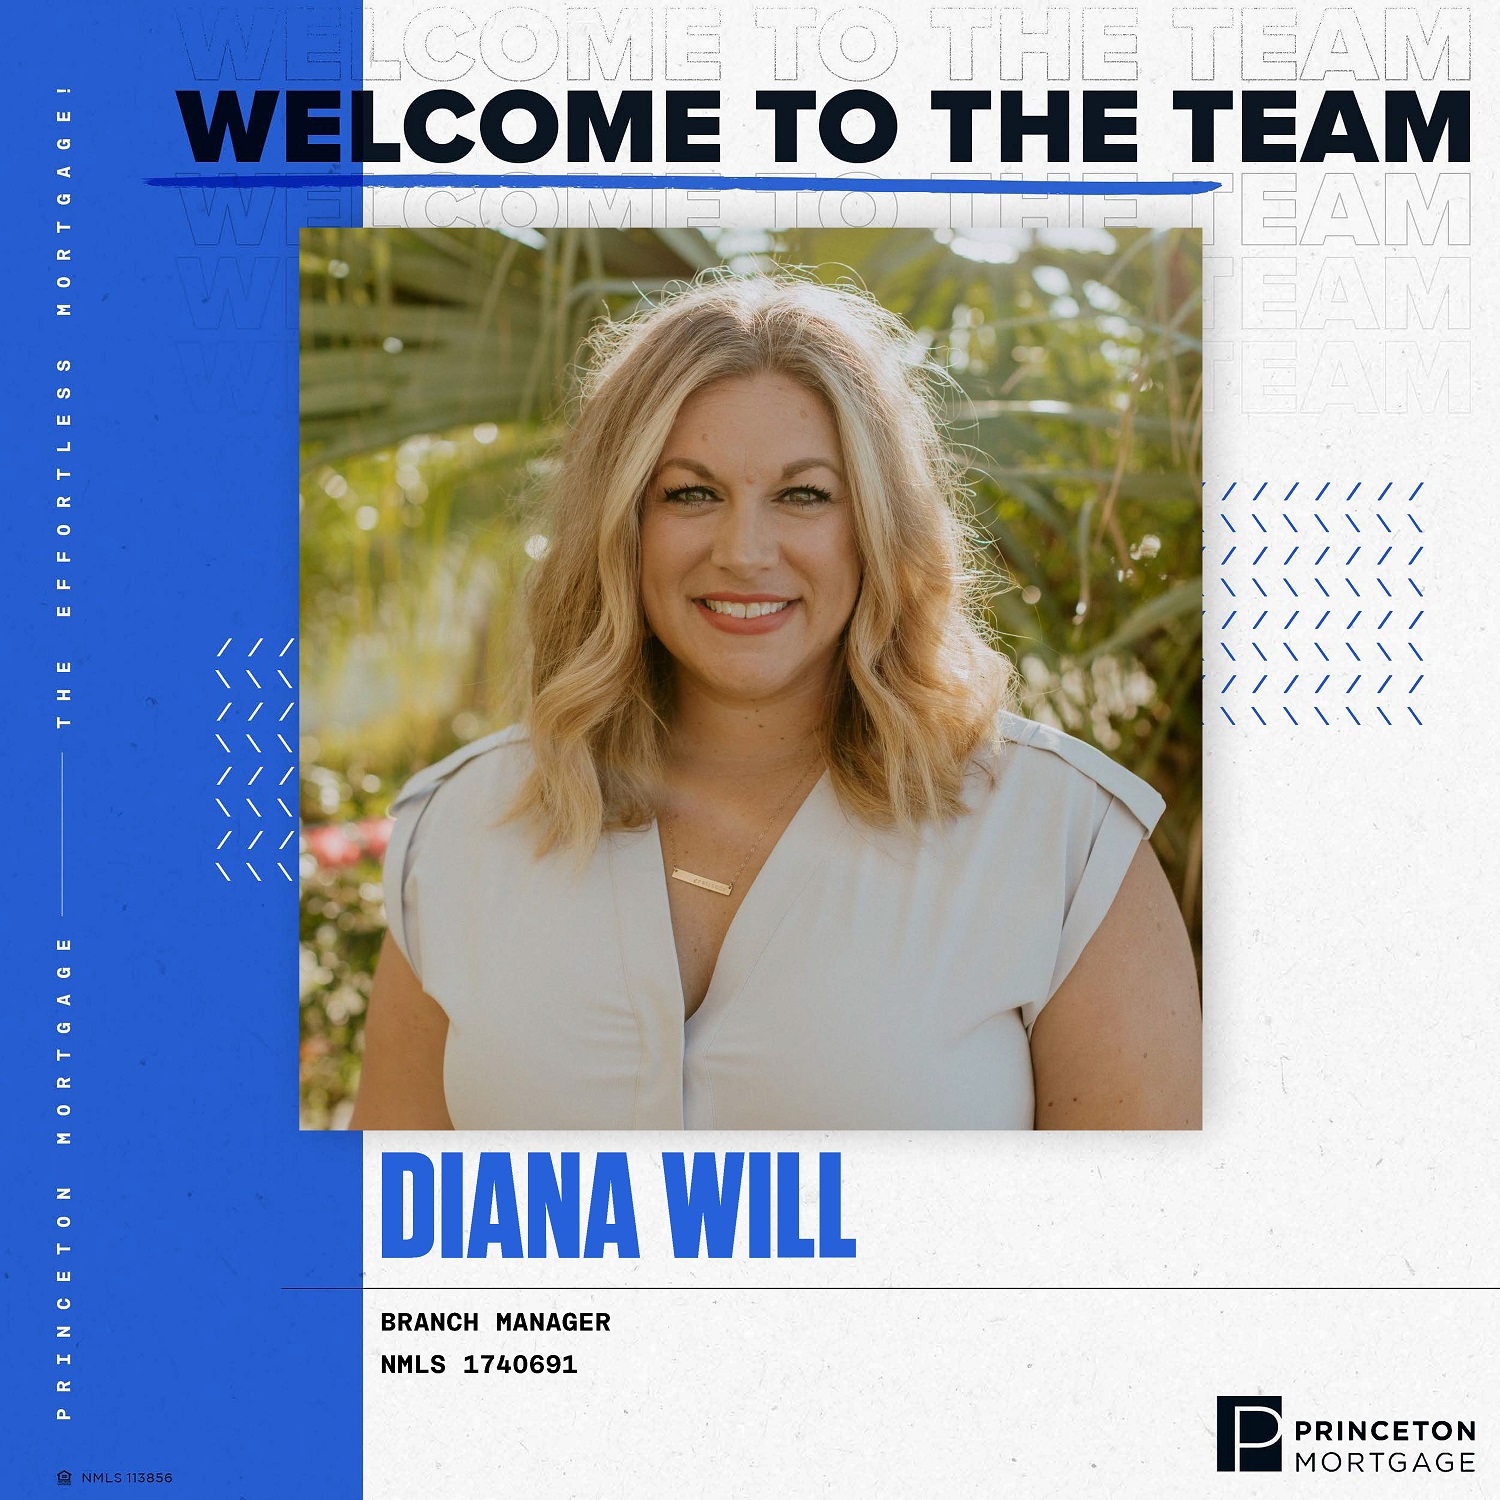 Diana Will Team Joins Princeton Mortgage